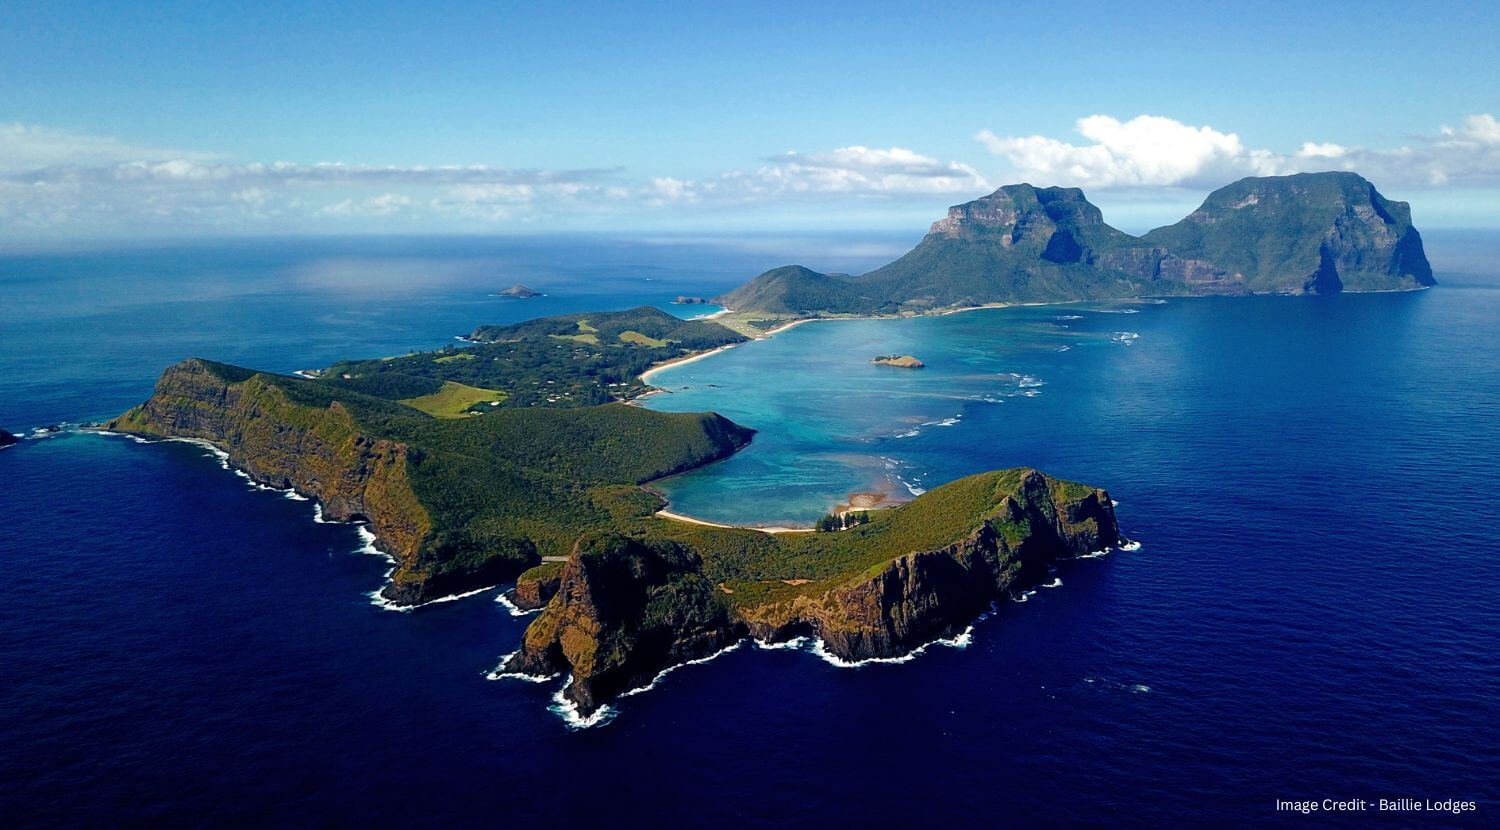 Lord-howe-aerial-Credit-Baillie-lodges-Newsletter-1500x830